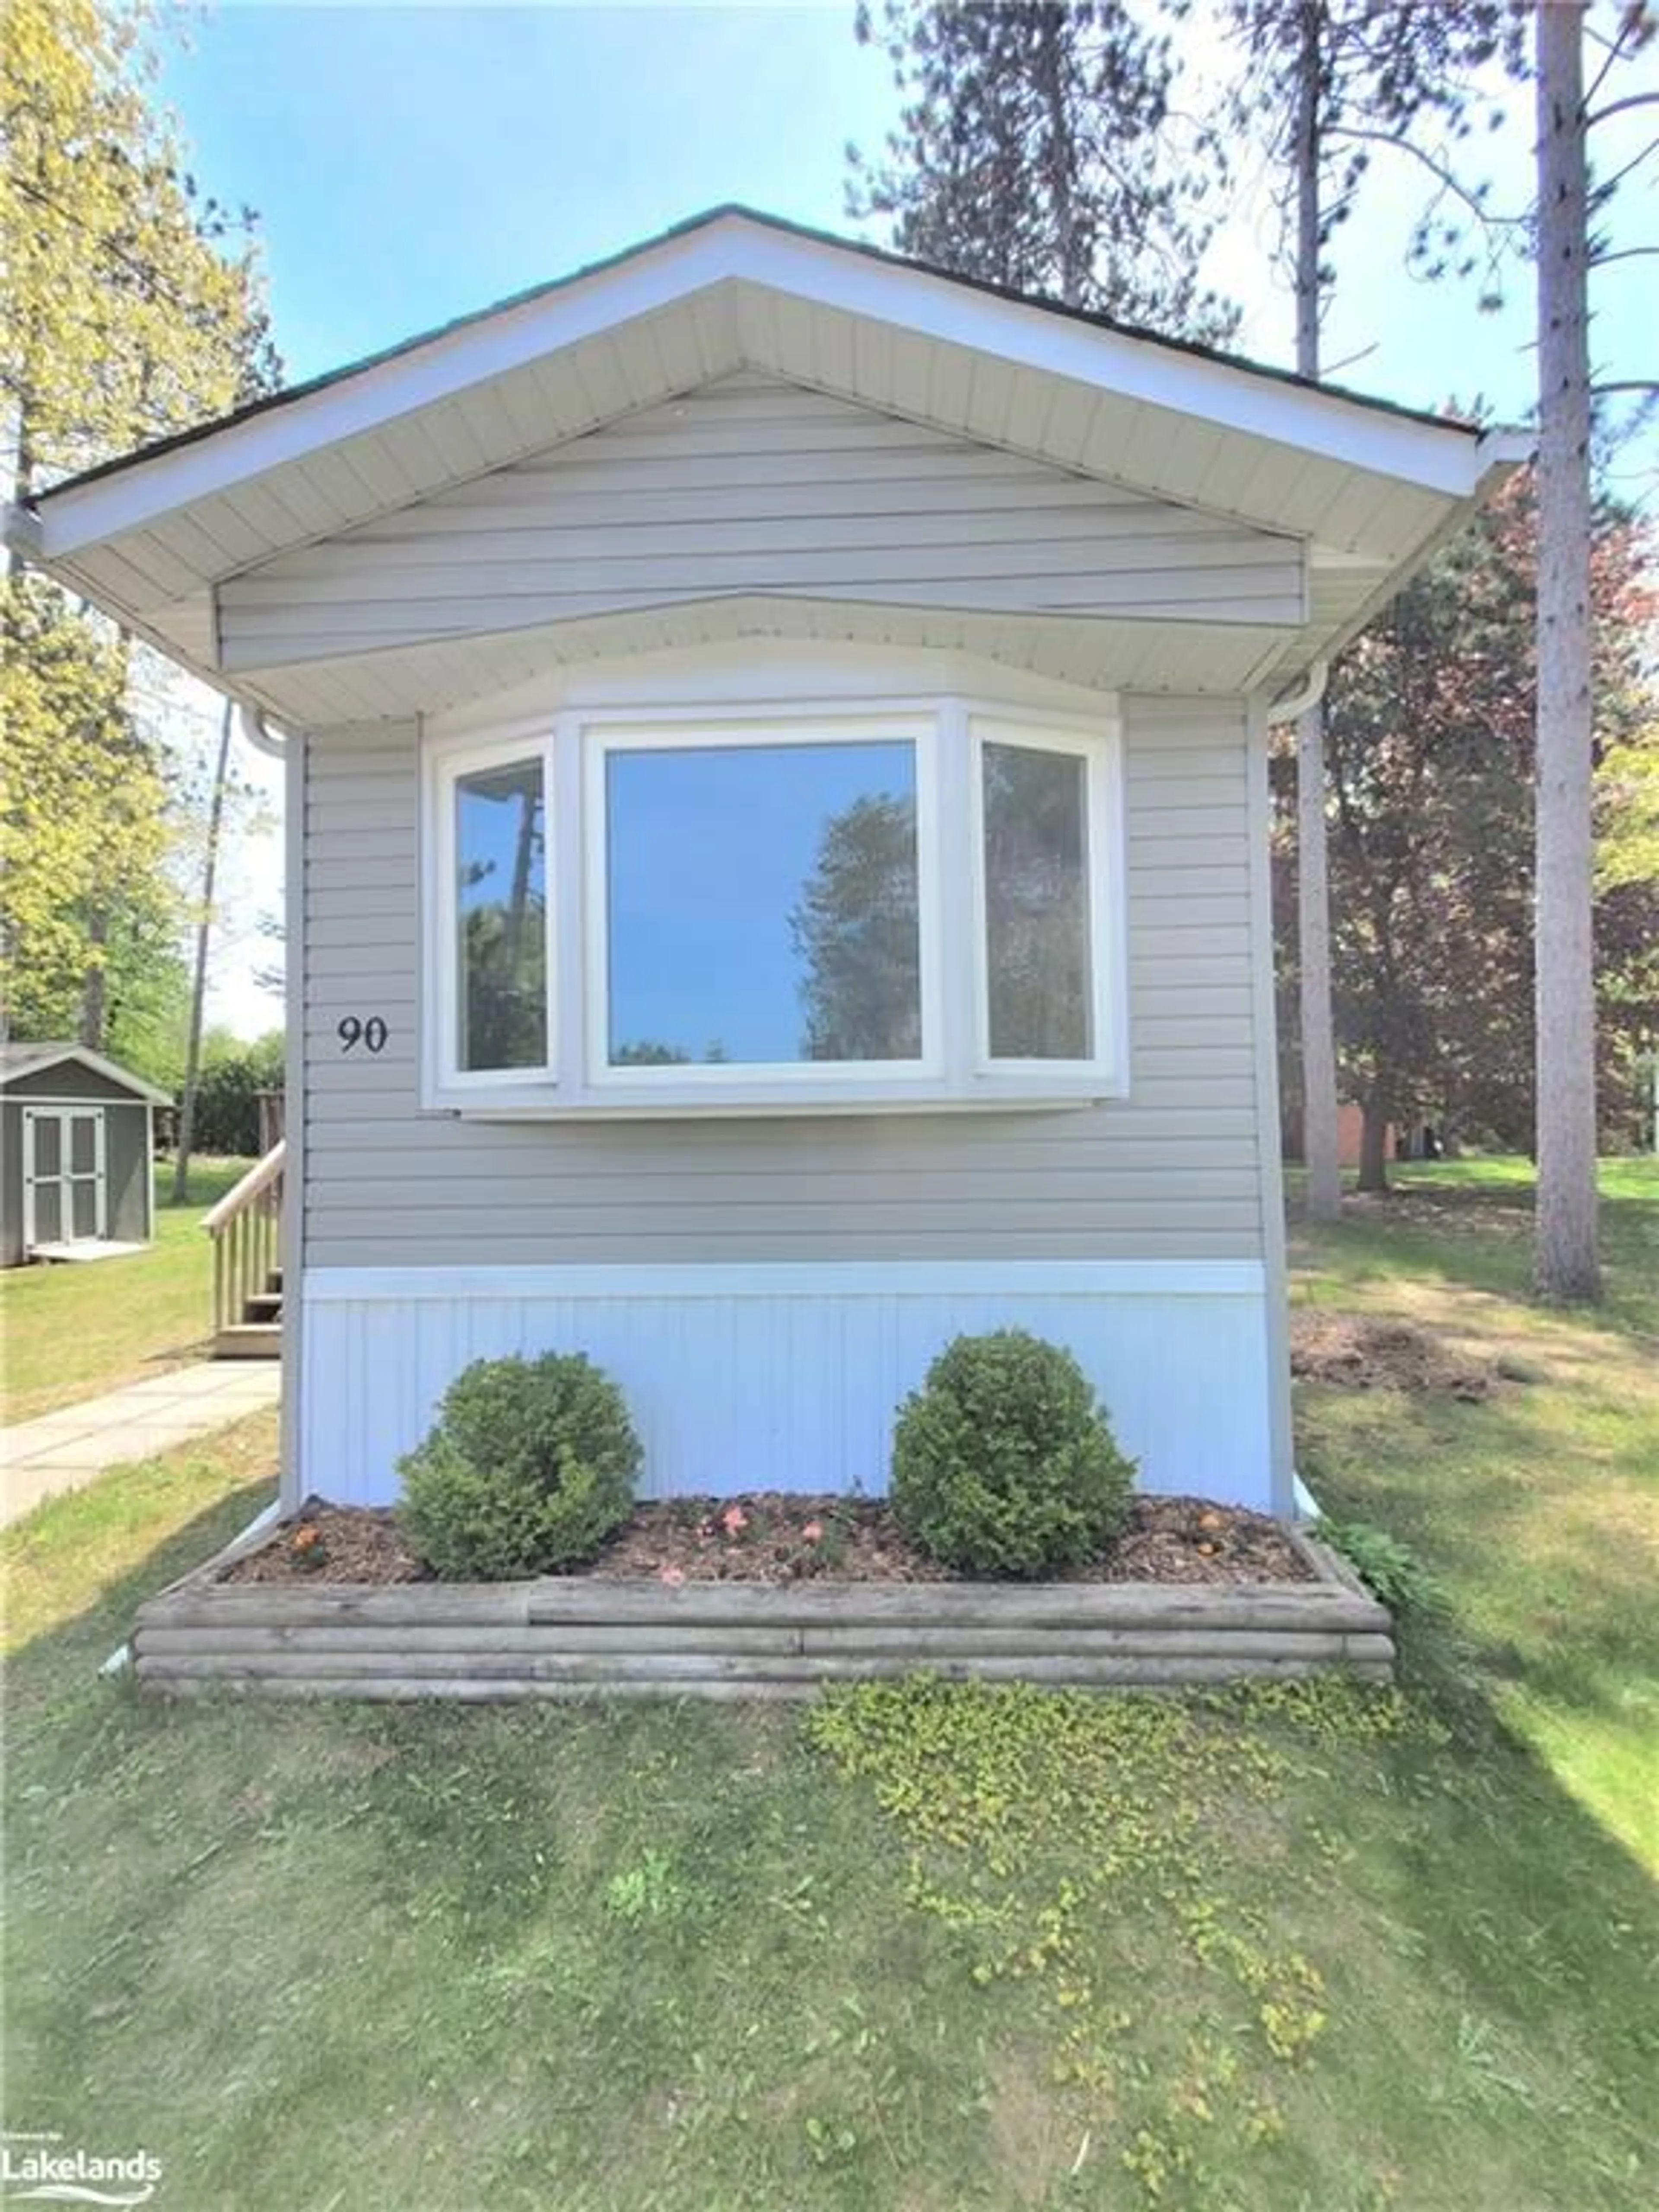 Home with vinyl exterior material for 5263 Elliott Side Rd #90, Tay Ontario L4R 4K3